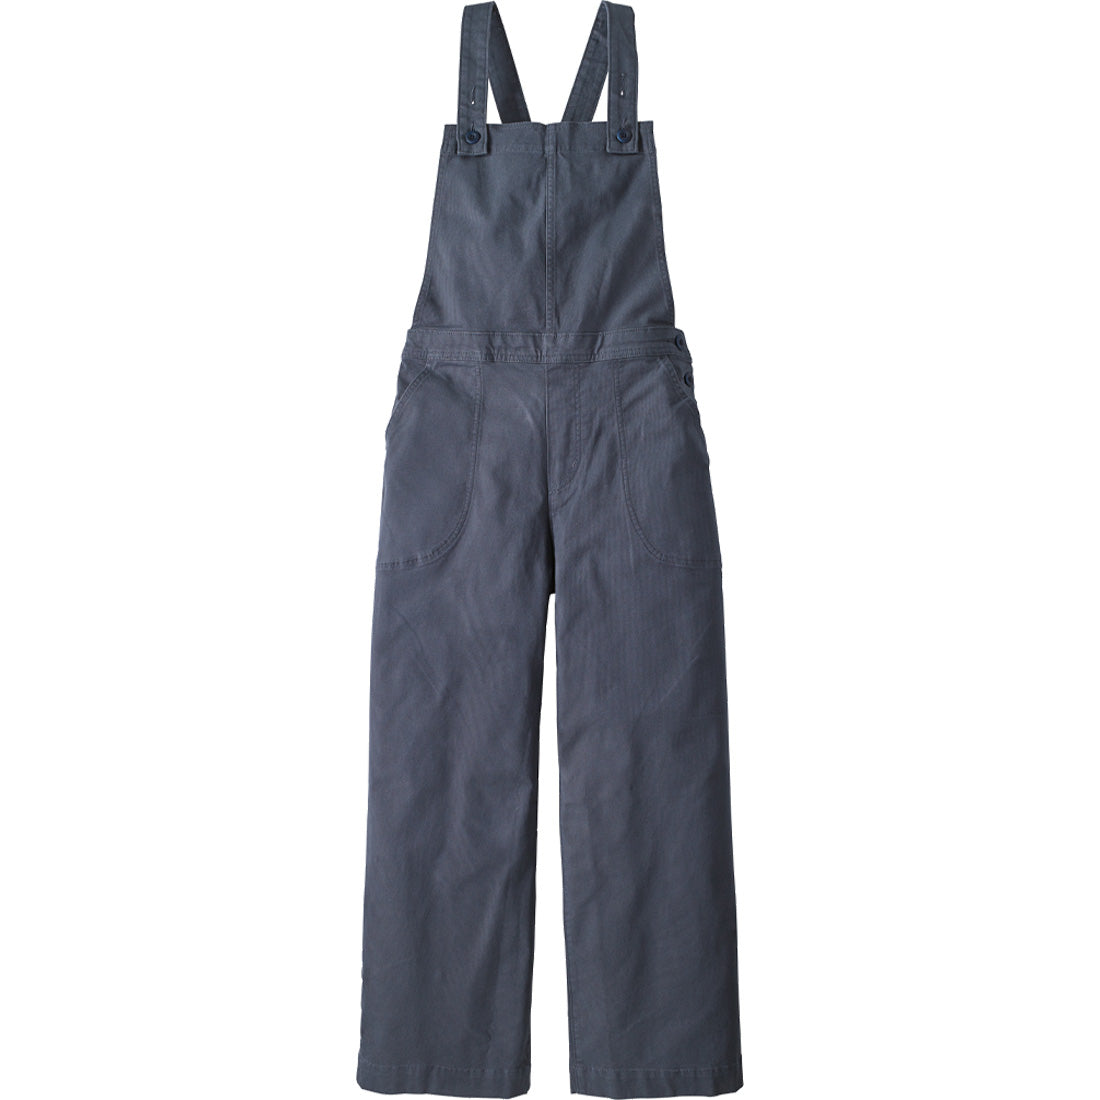 Patagonia Stand Up Cropped Overall - Women's